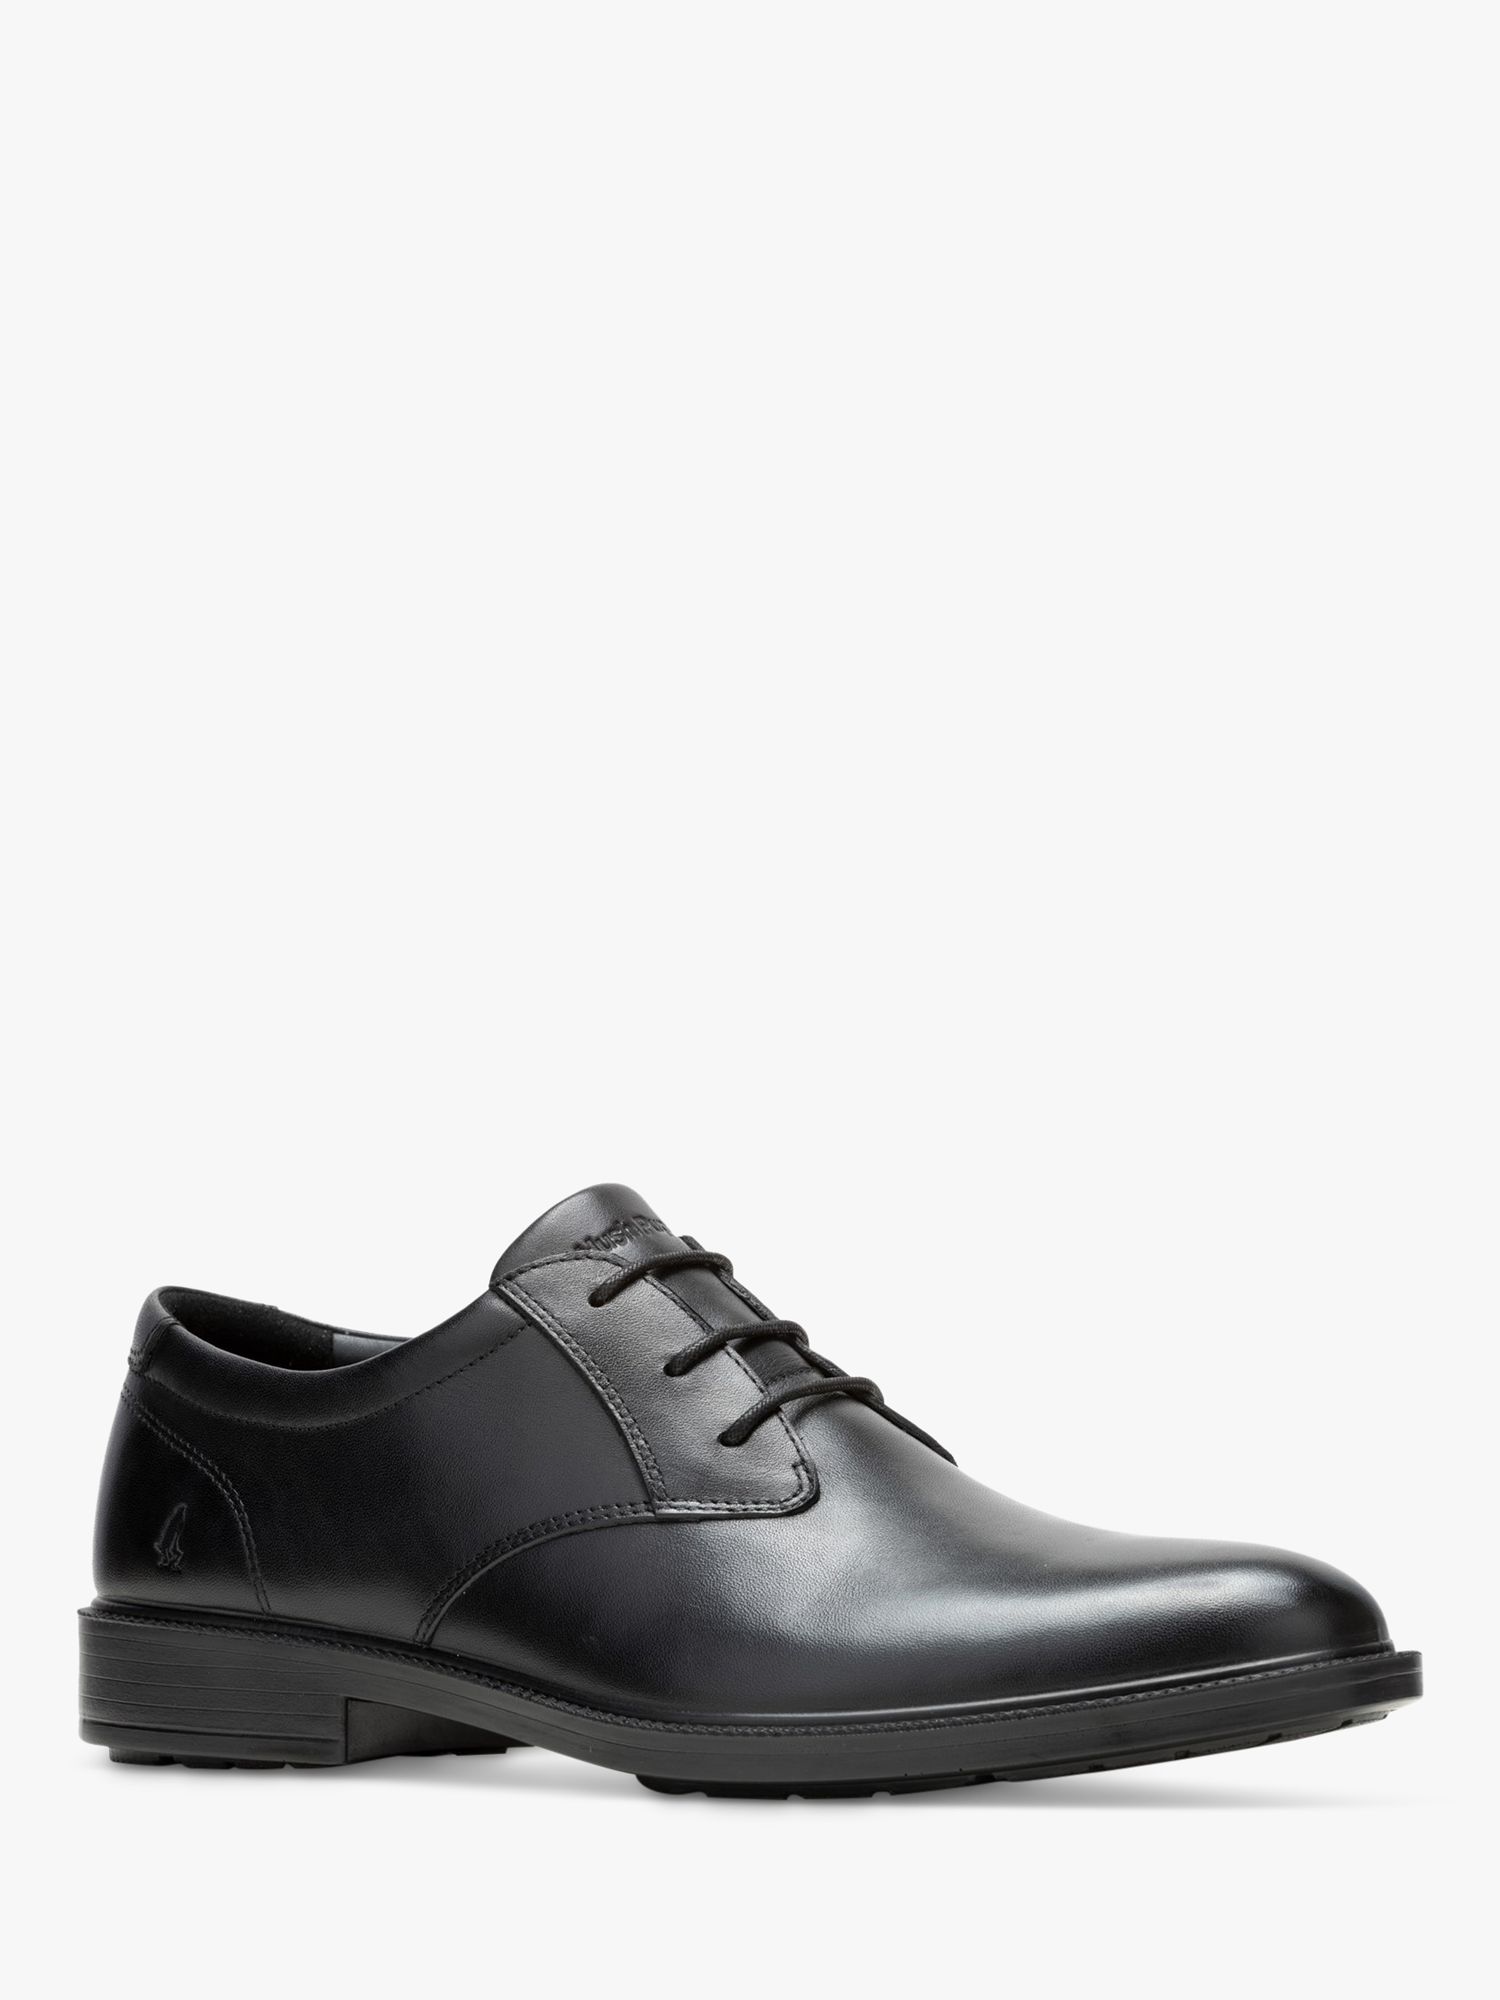 Hush Puppies Banker Lace-Up Shoes, Black at John Lewis & Partners